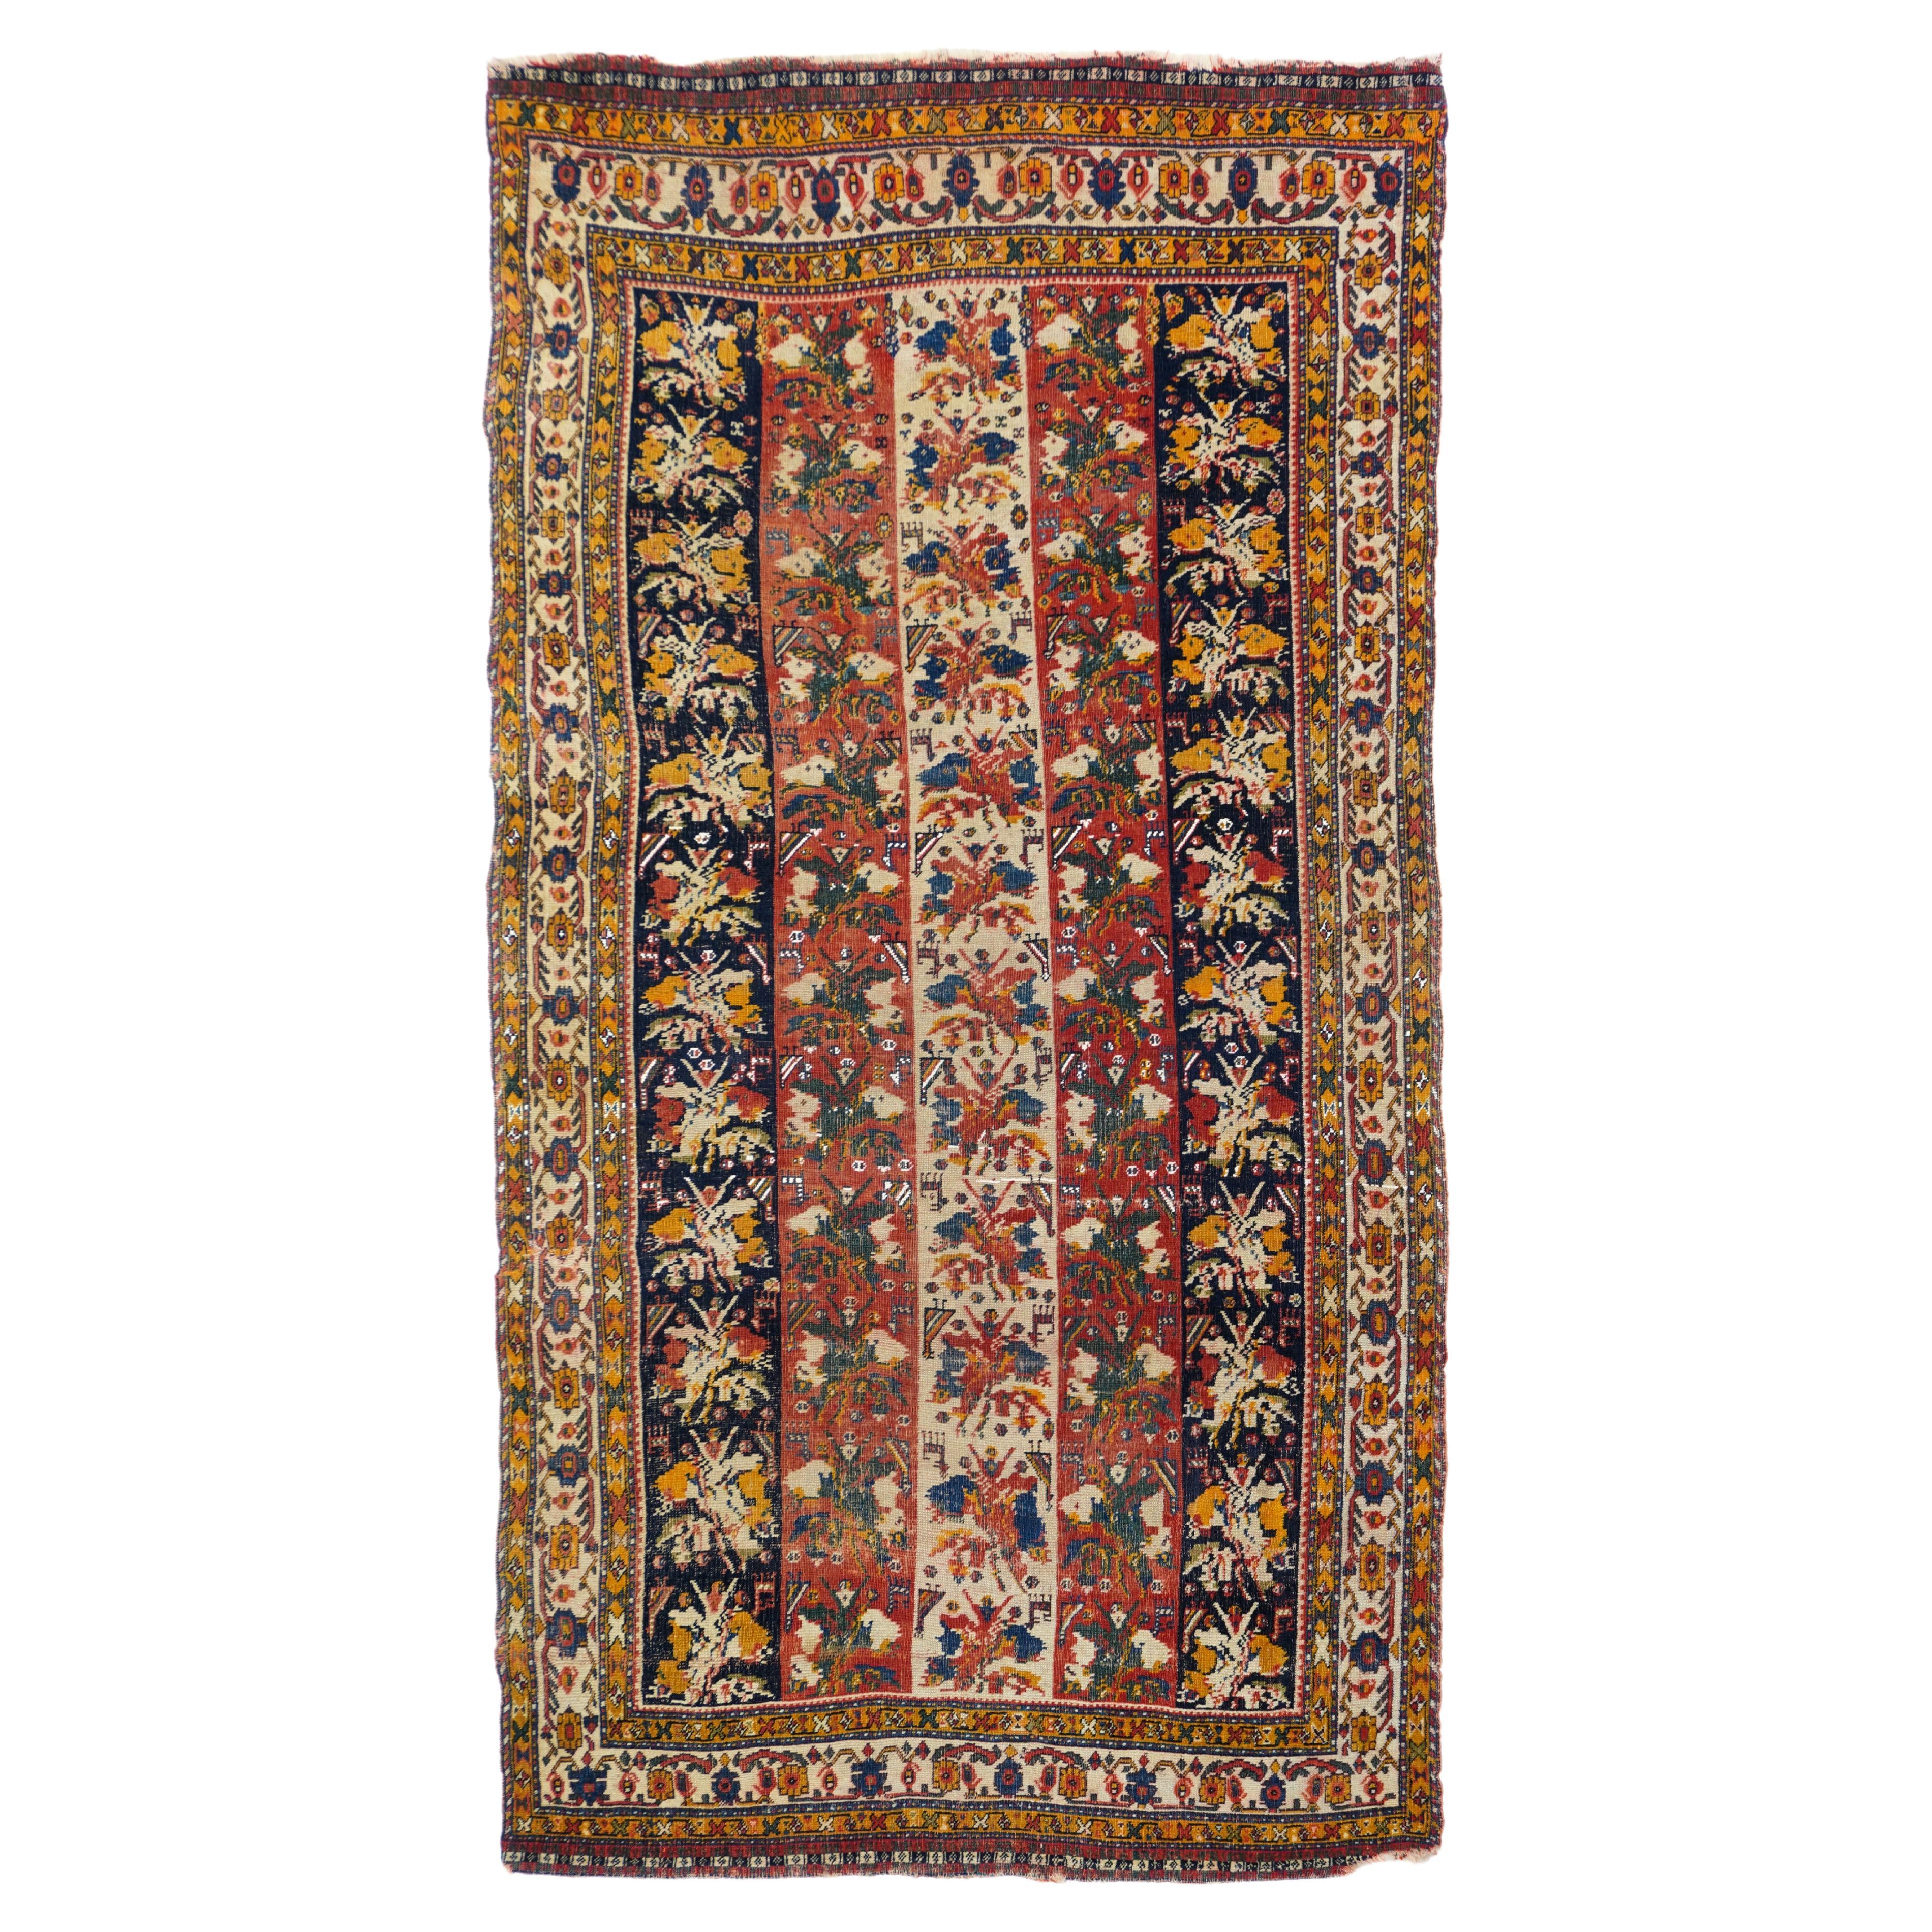 Where are Qashqai rugs made?